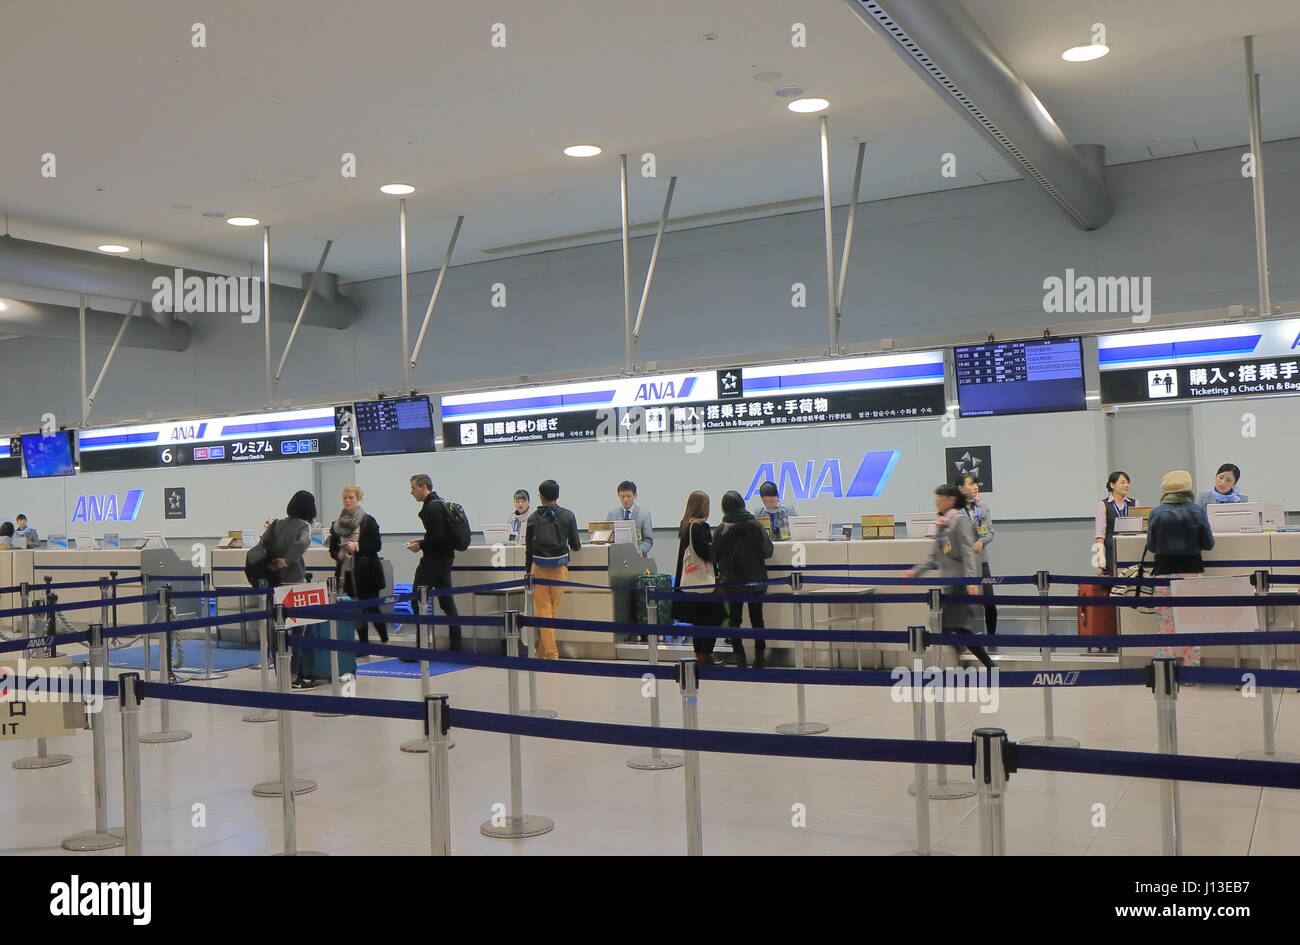 People check in at ANA All Nippon Air check in counter Kansai international airport. Stock Photo